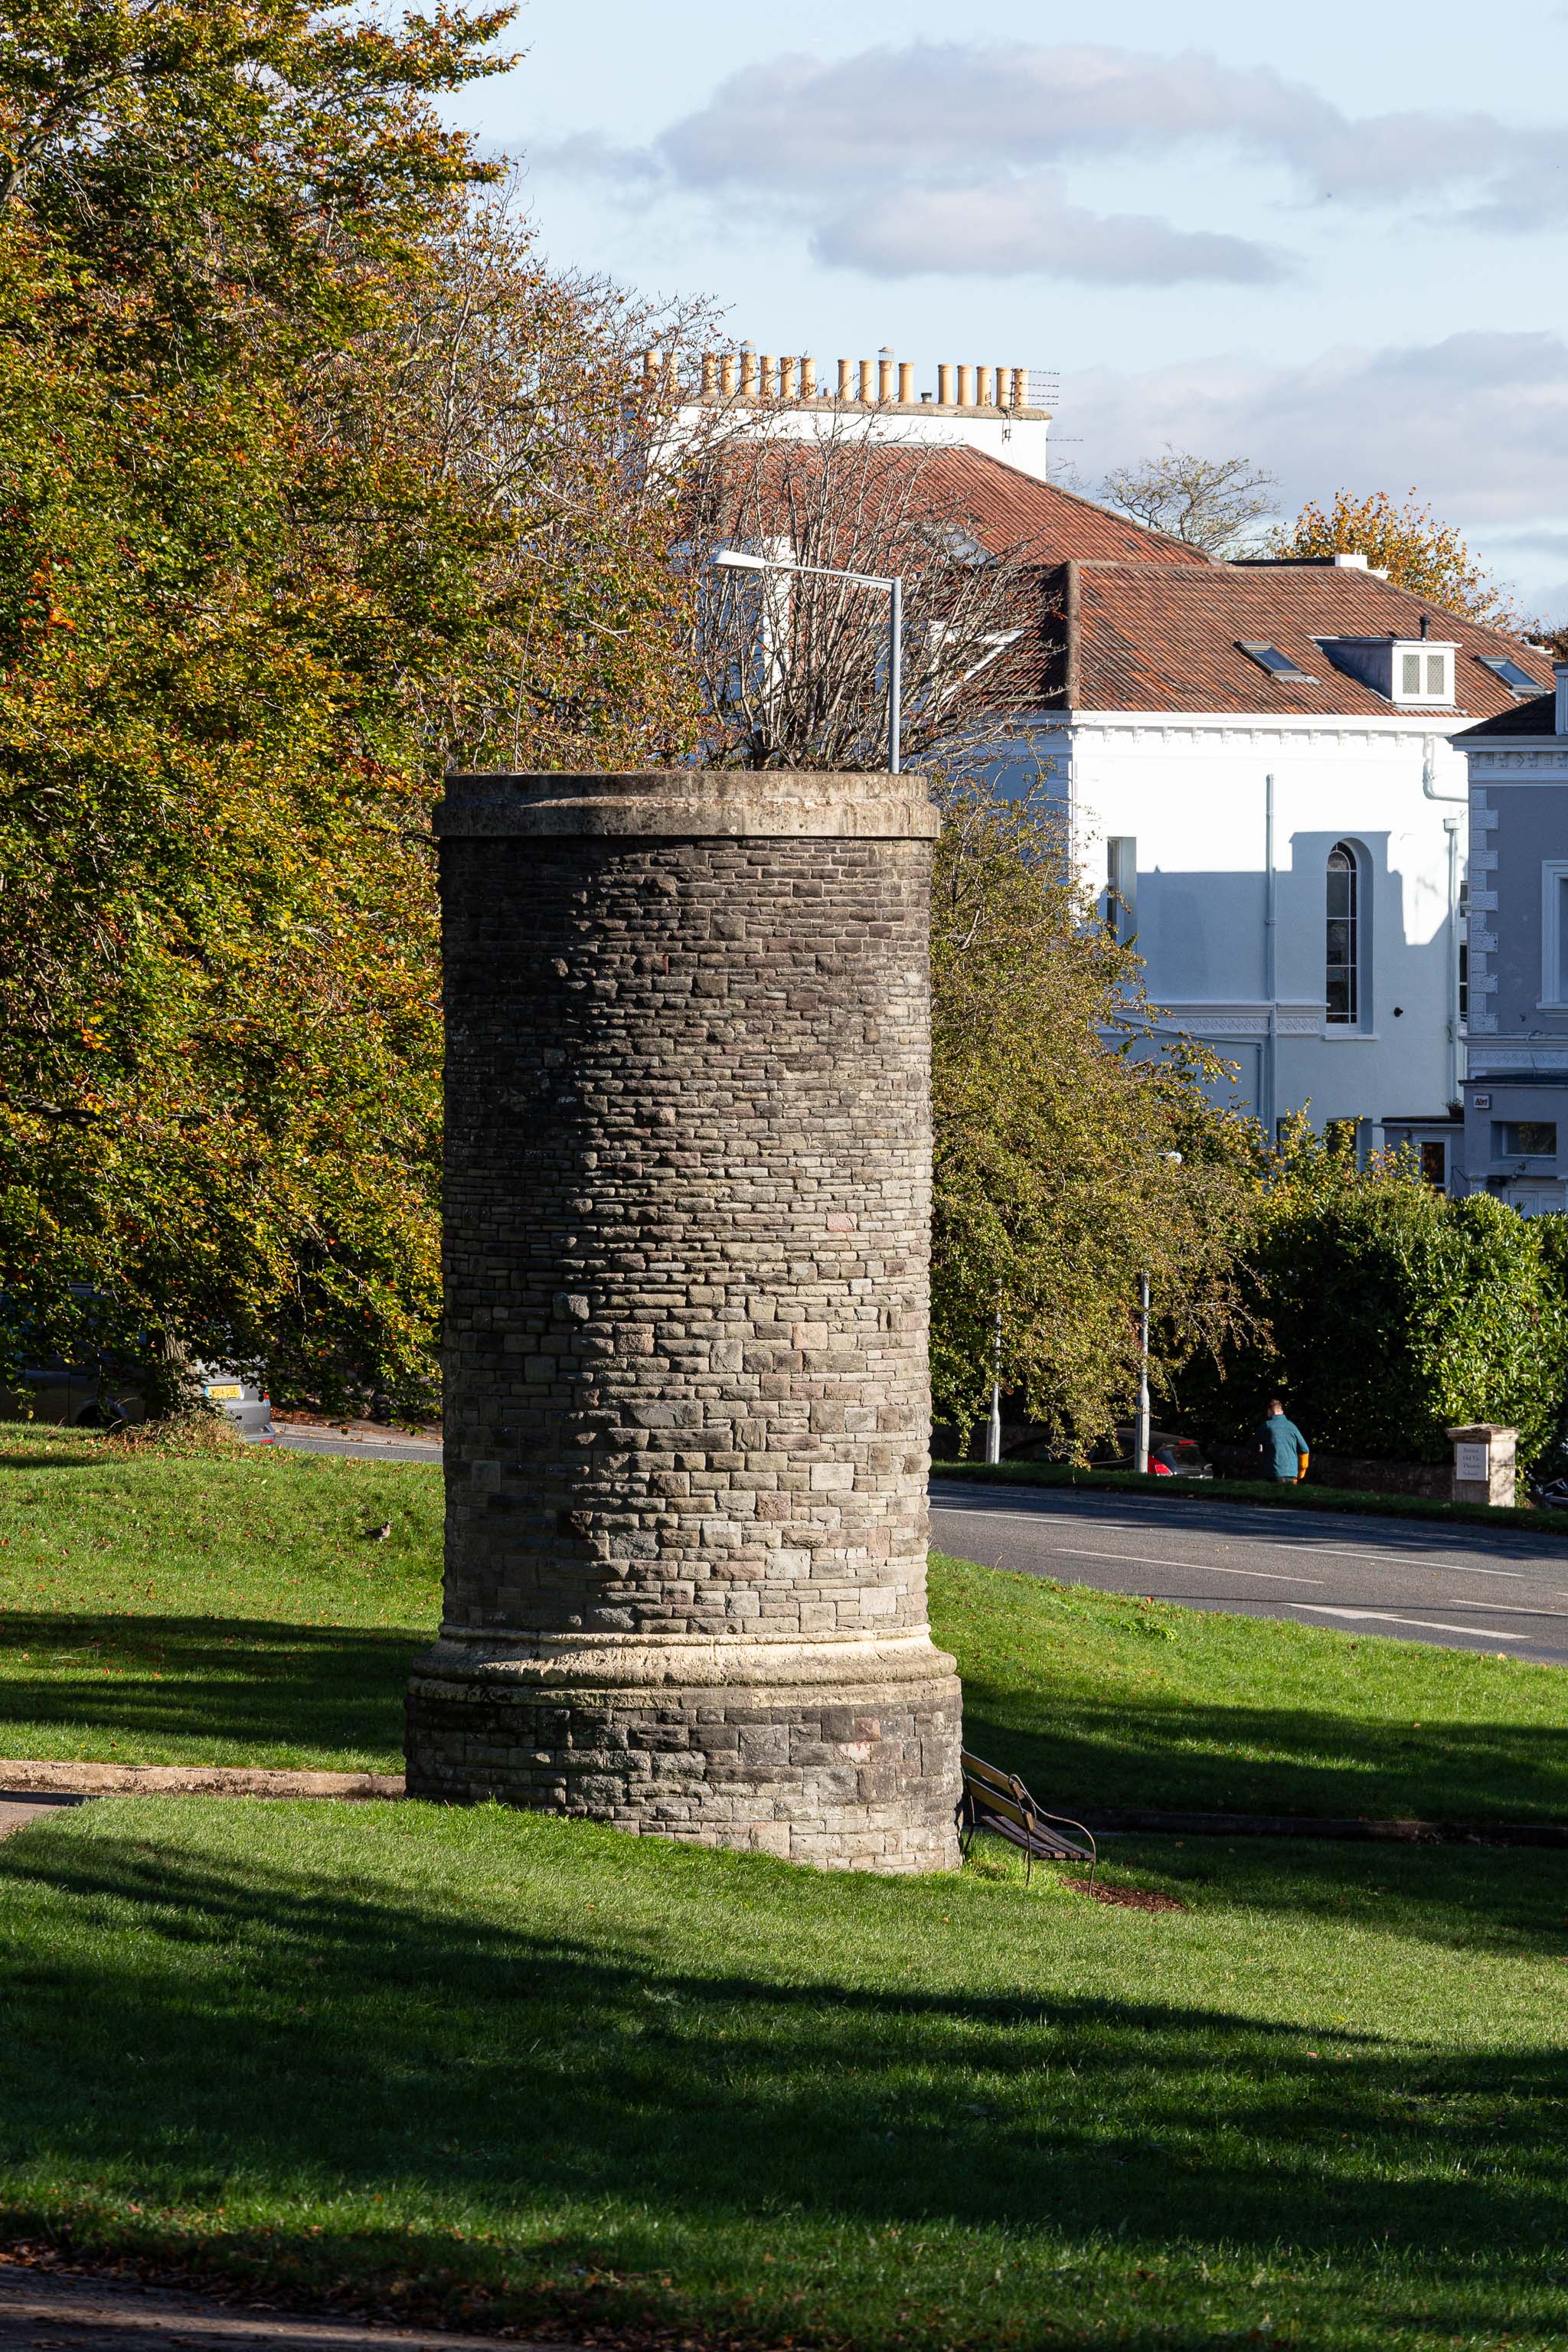 Pembroke Road Ventilation Shaft
This is the Pembroke Road ventilation tower, sometimes known as the "pound tower", as it's next to the pound the Downs maintenance people use for e...